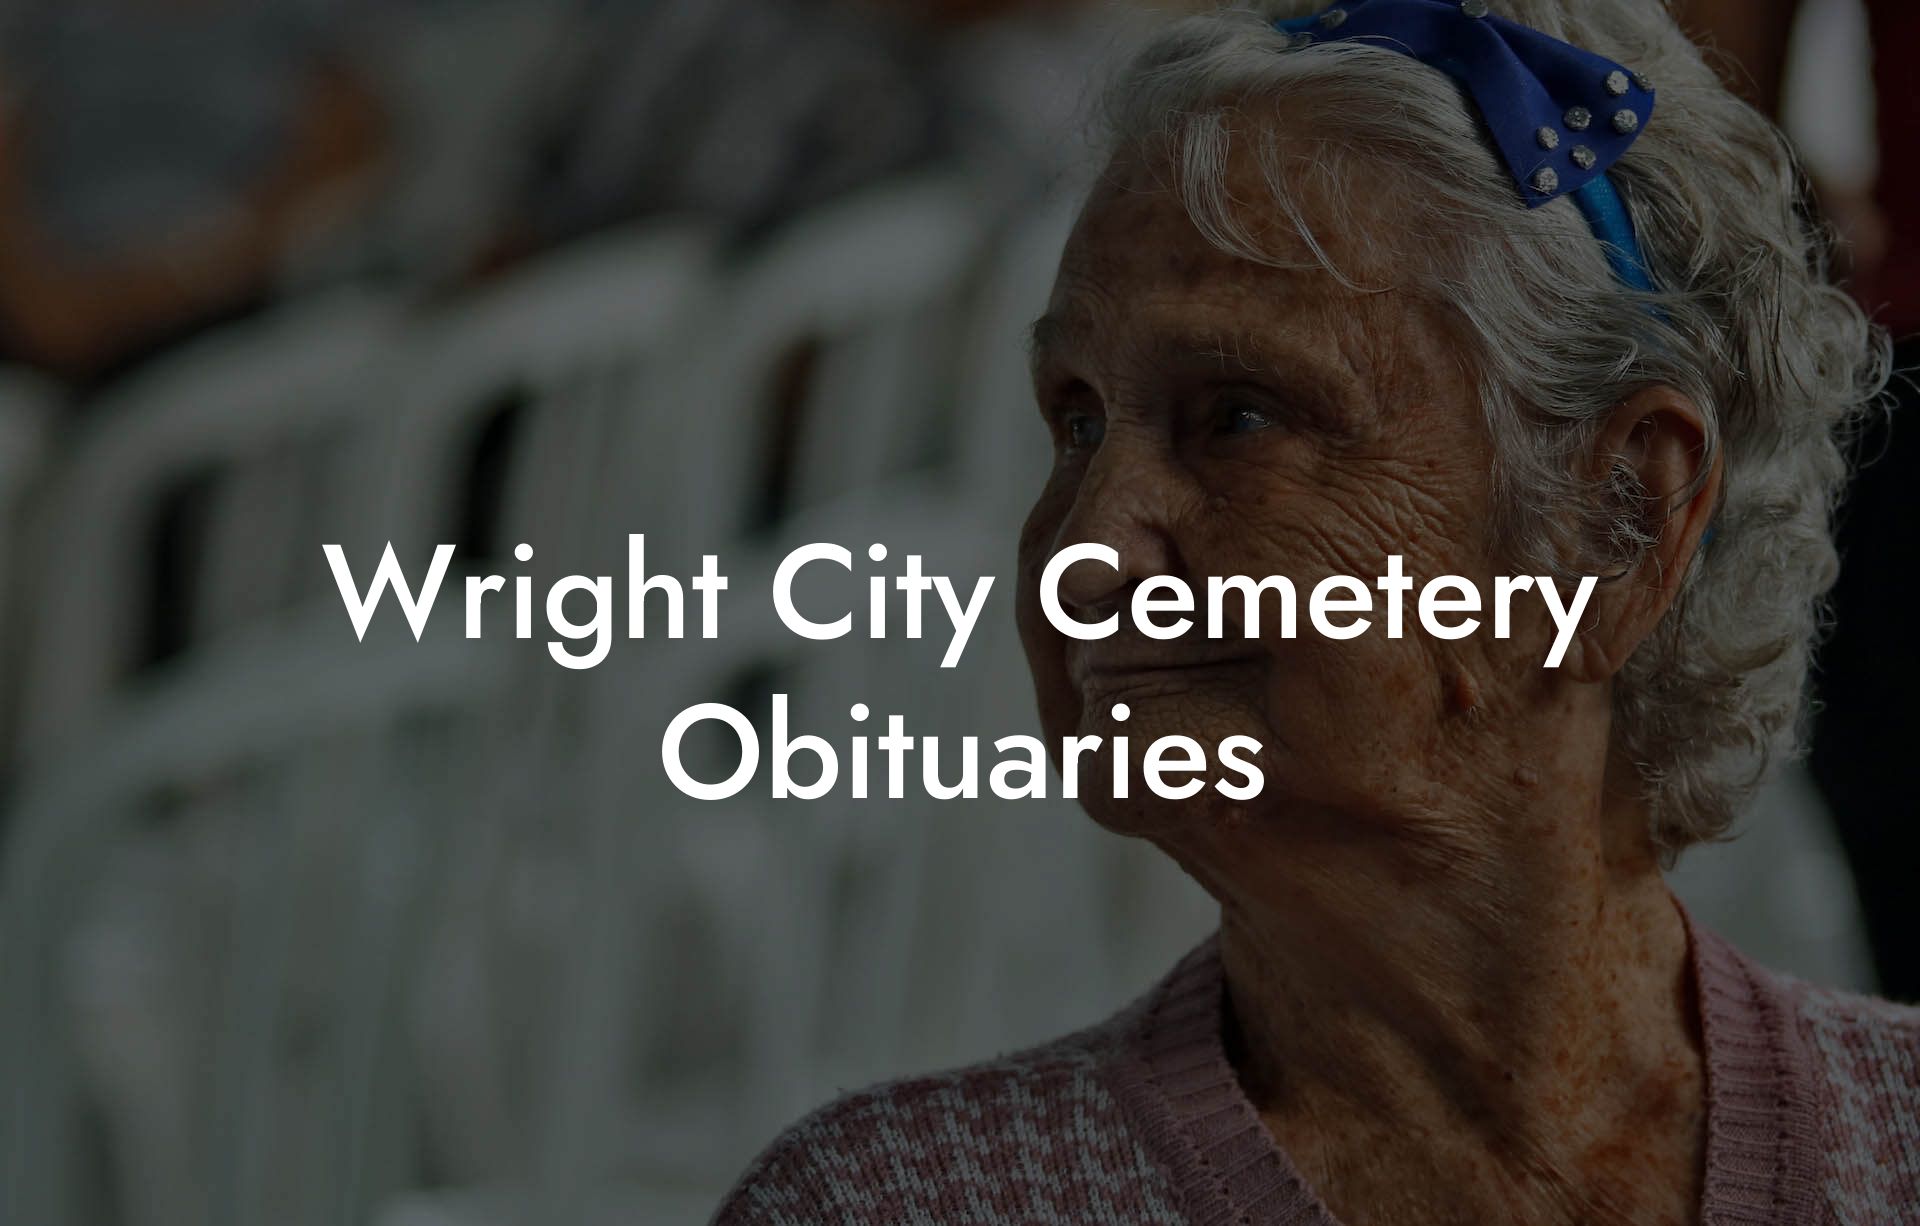 Wright City Cemetery Obituaries